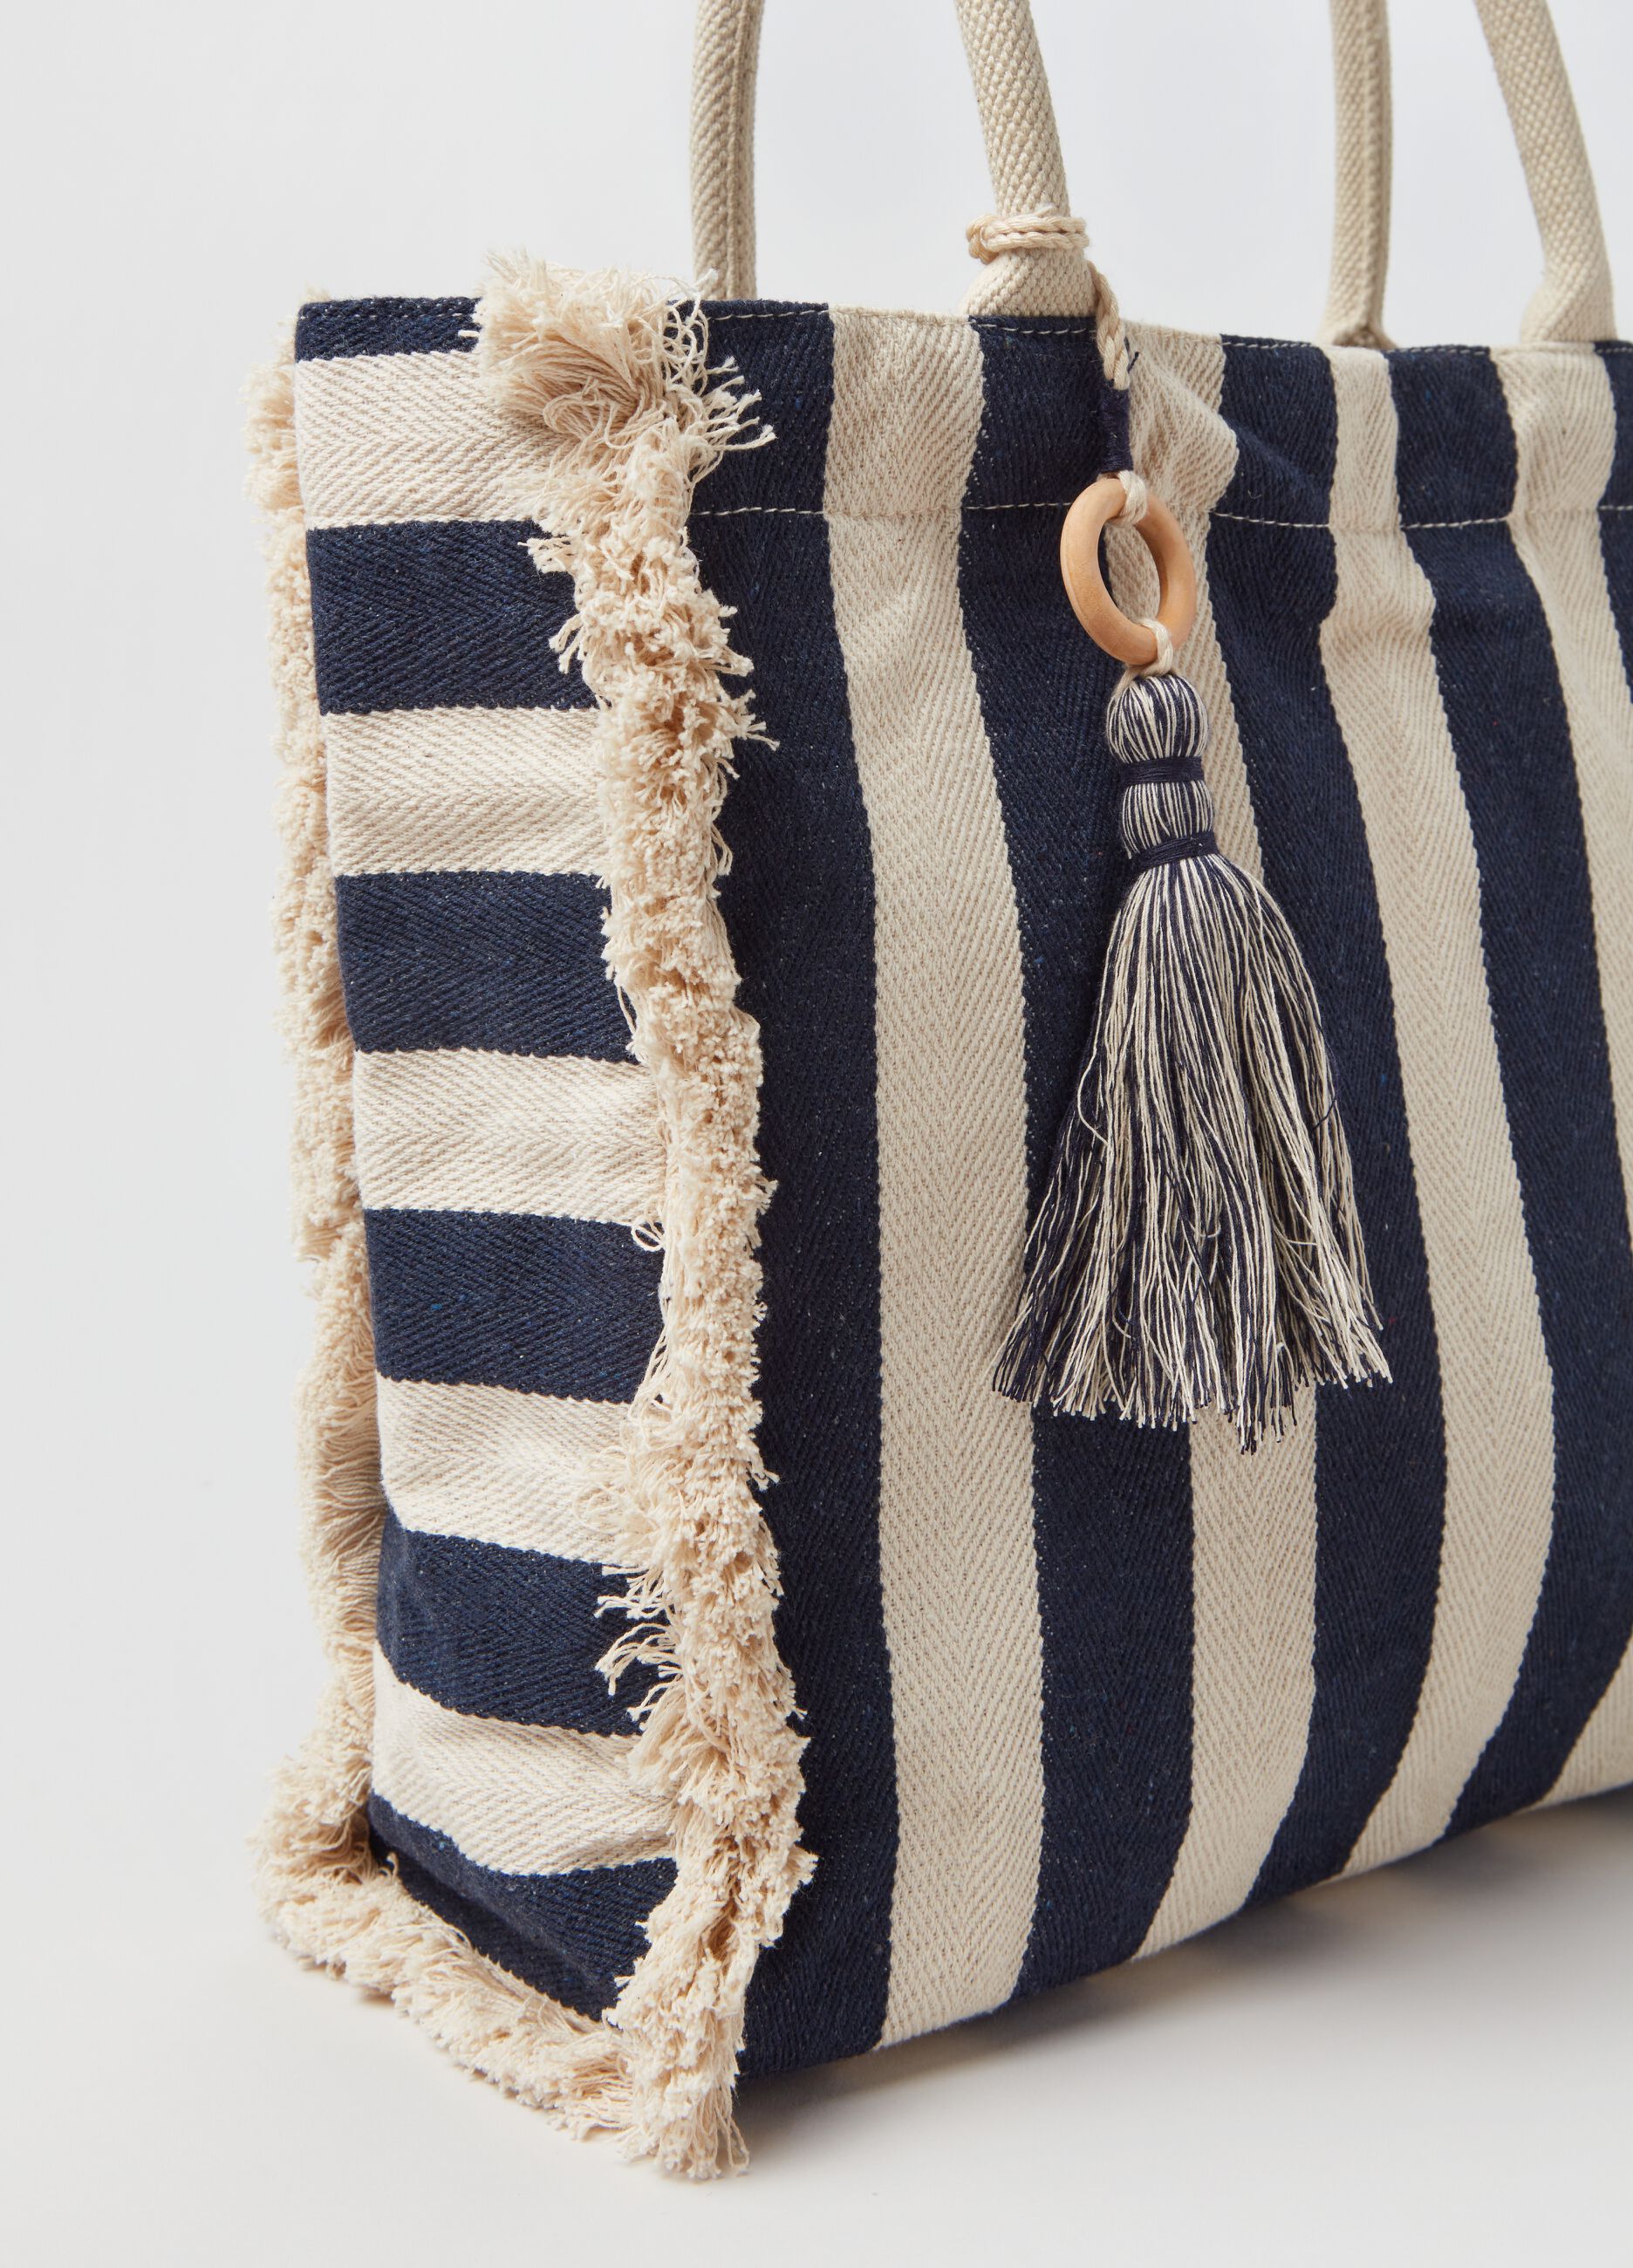 Striped bag with tassel